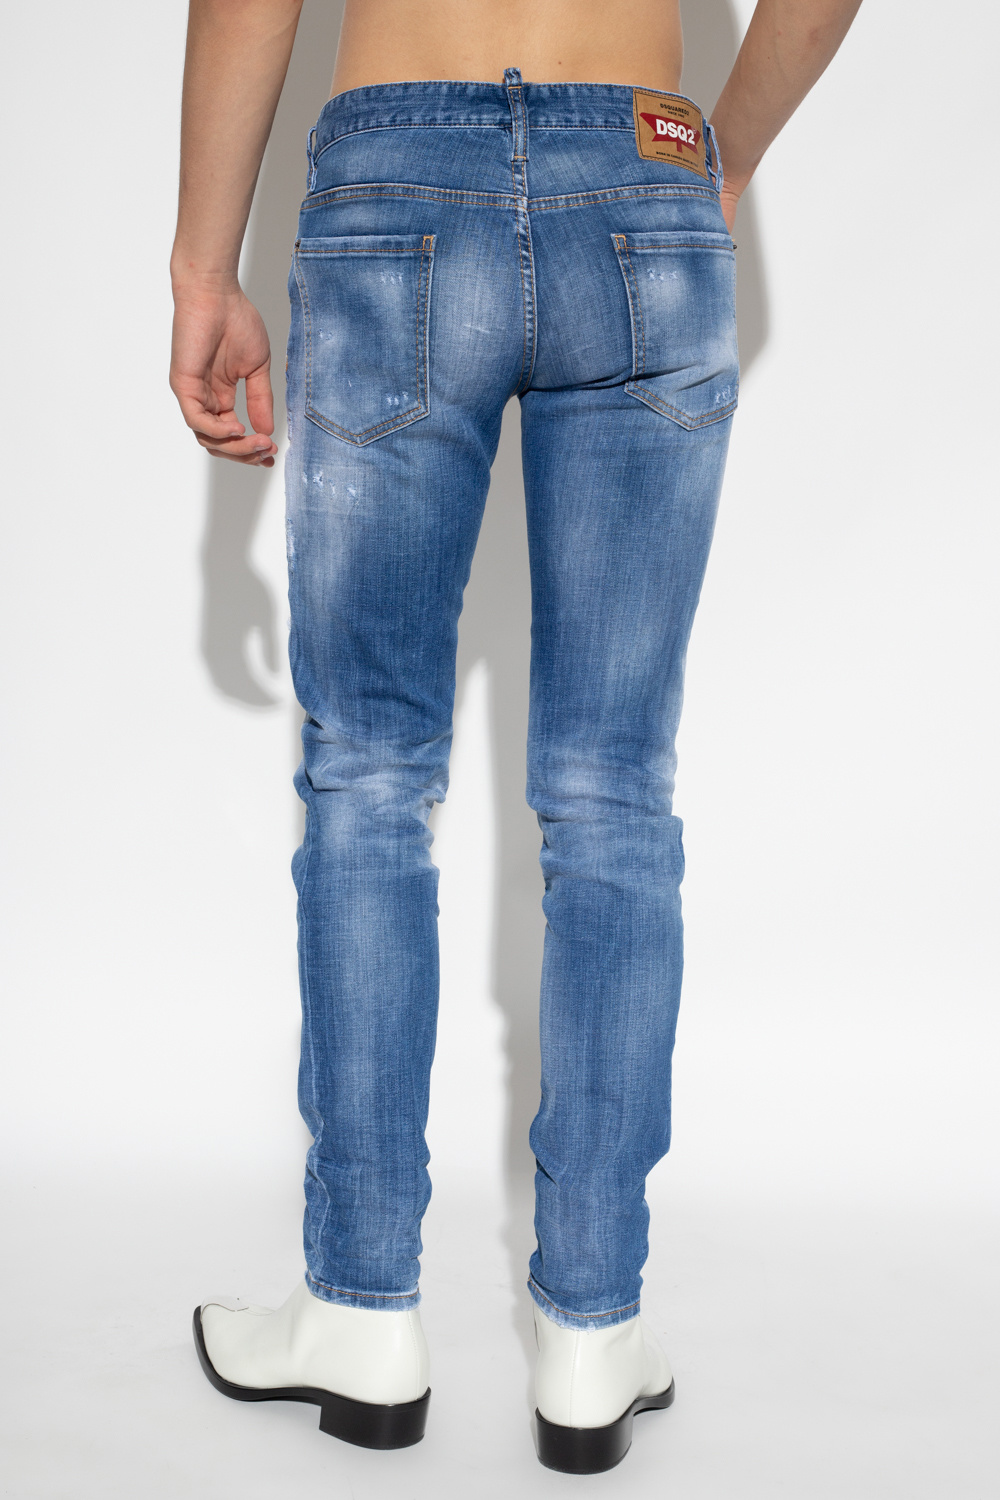 IetpShops Italy - Blue 'Slim' jeans Dsquared2 - Pants with frontal